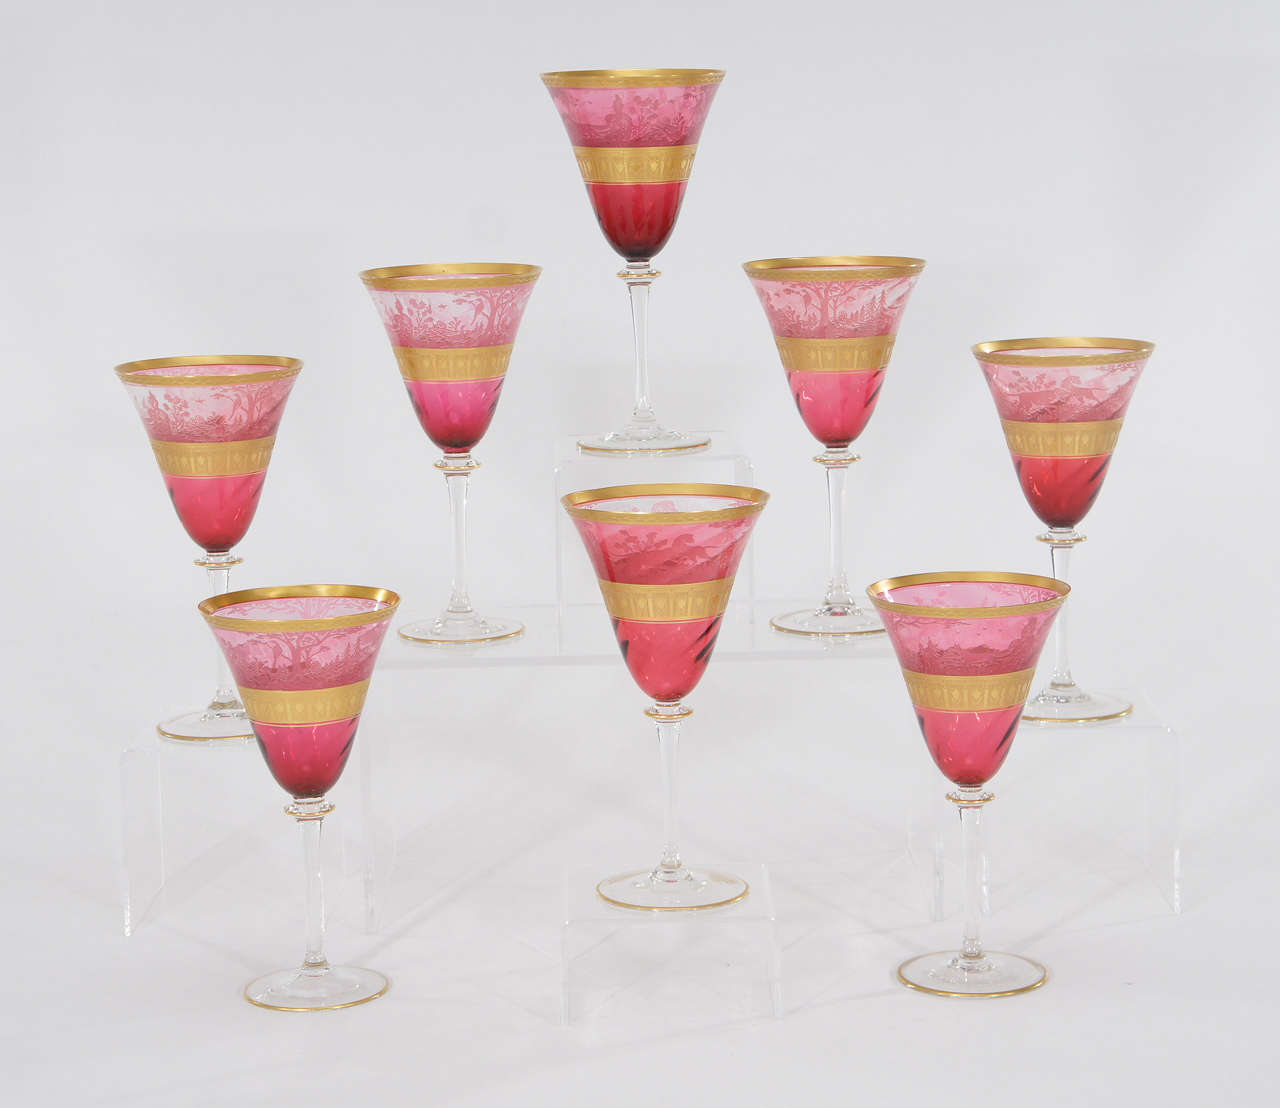 A collector's dream set. Eight extraordinary Moser water/ wine goblets in hand blown cranberry crystal. Not one, but a set of 8! The goblets are optic swirled and the top half is decorated with an acid-cut back cameo relief depicting a forest and